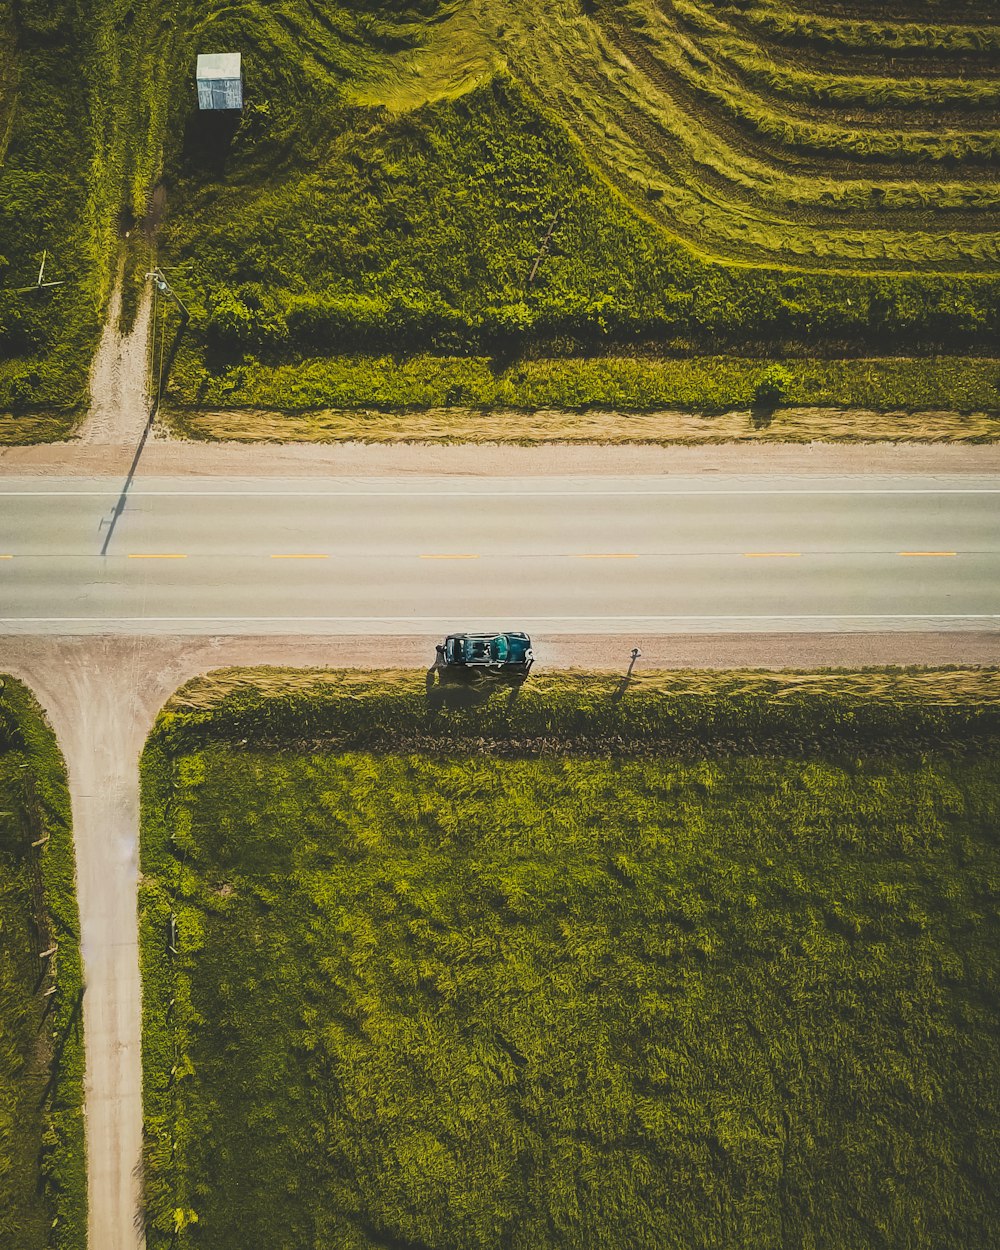 bird's eye view of car on road